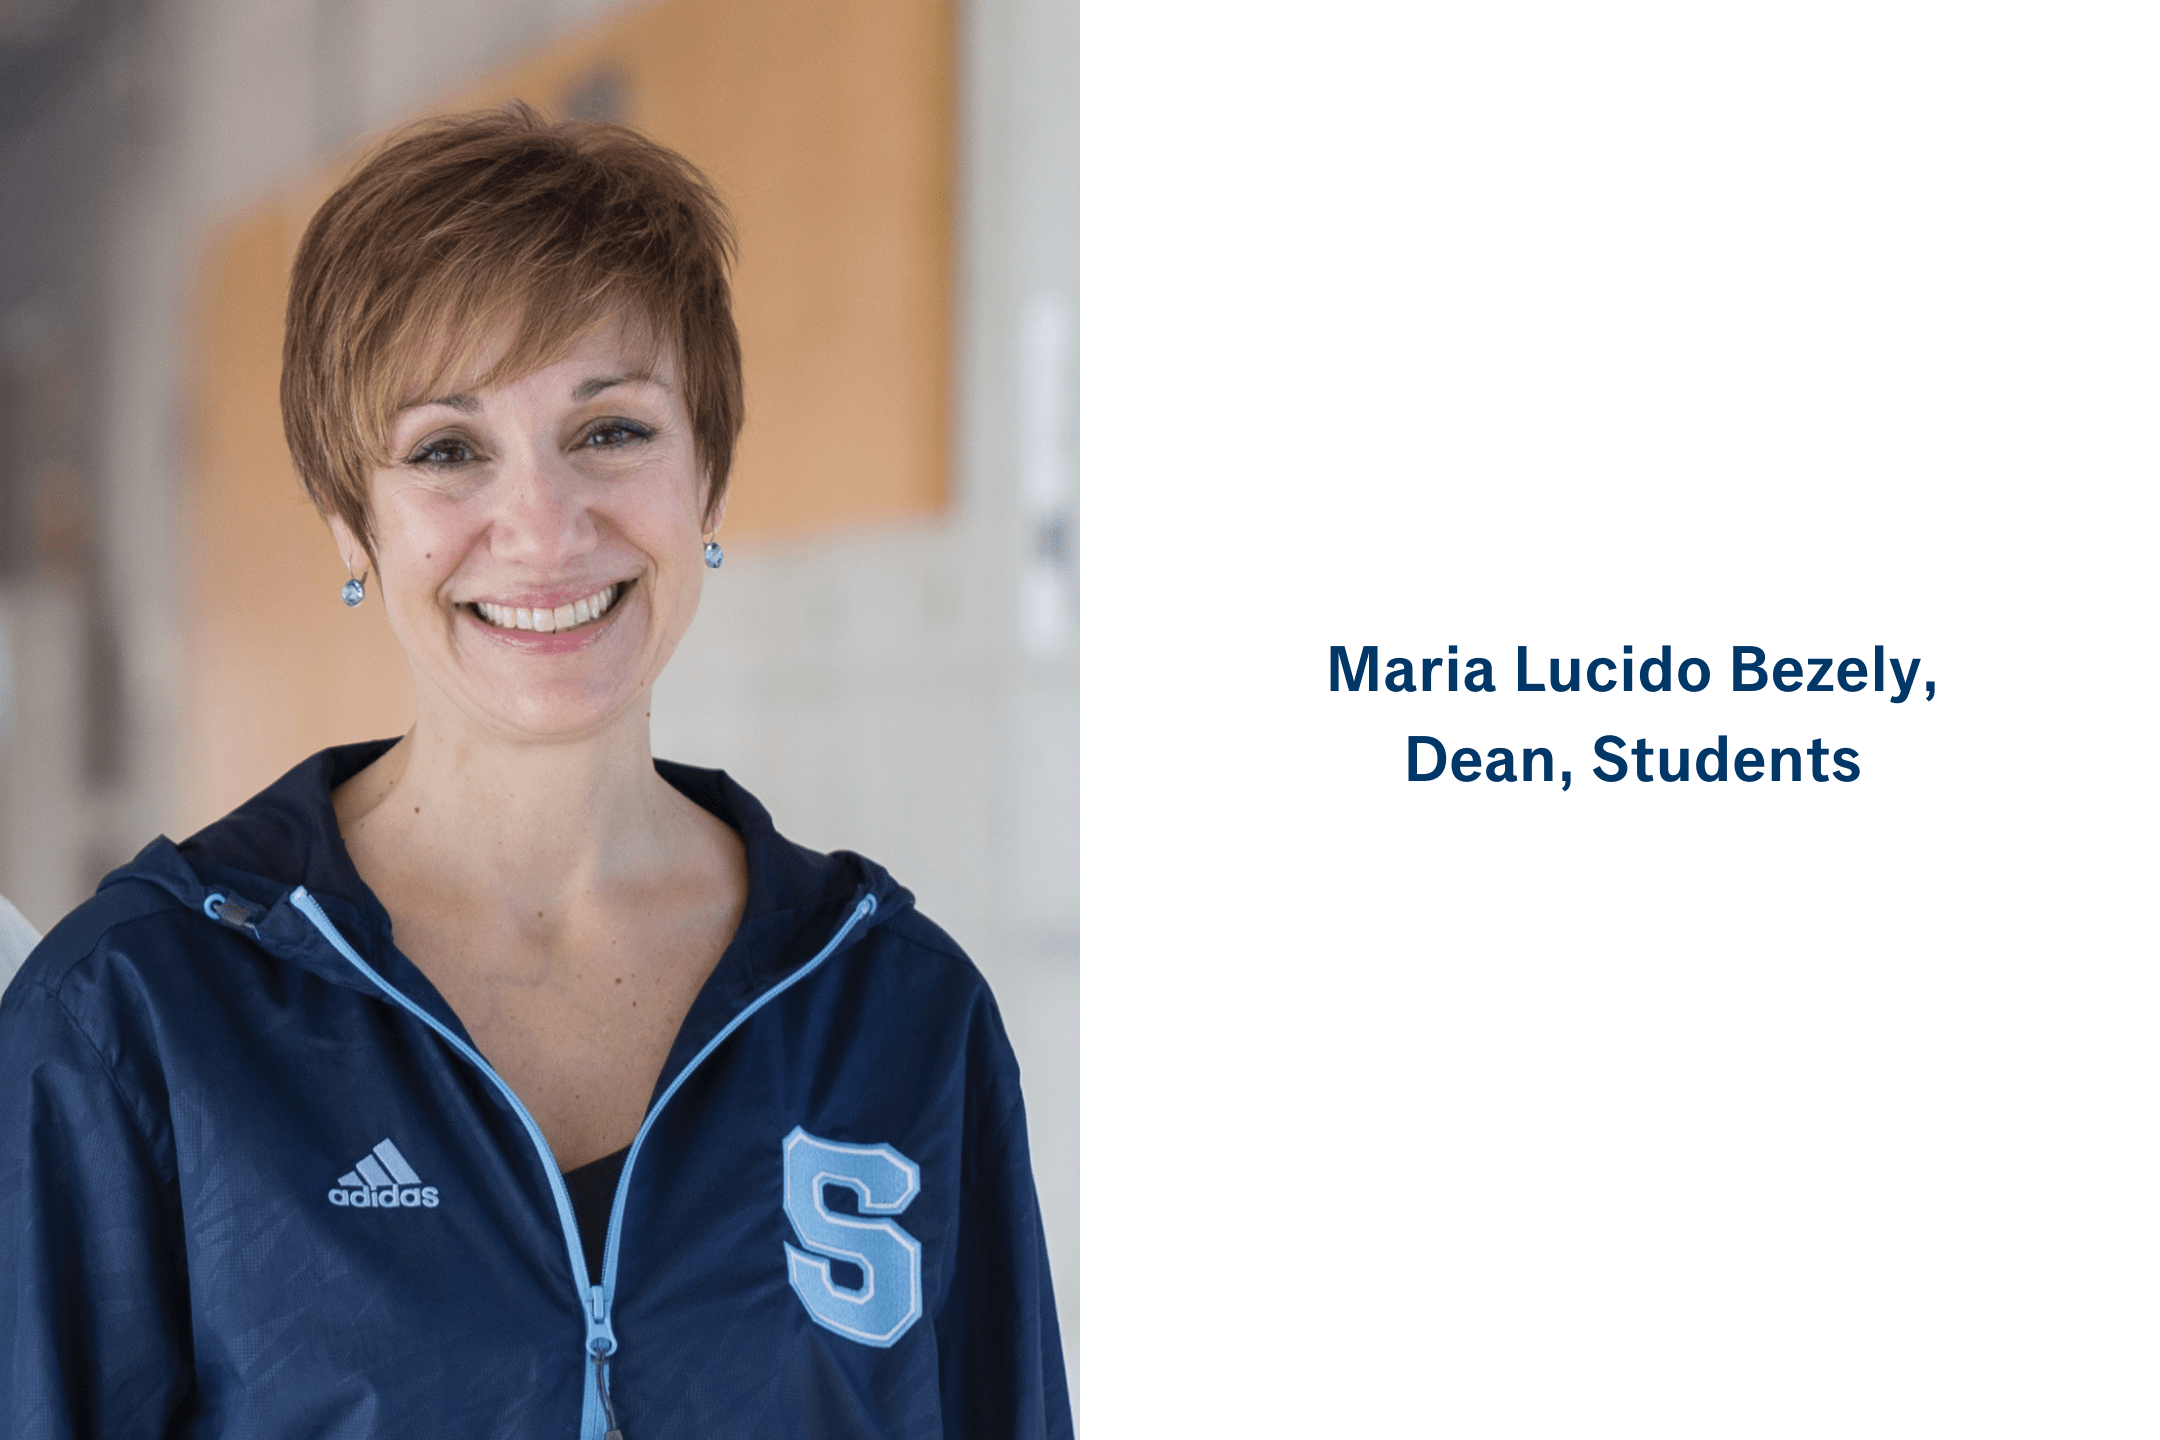 Maria Lucido Bezely, Dean of Students